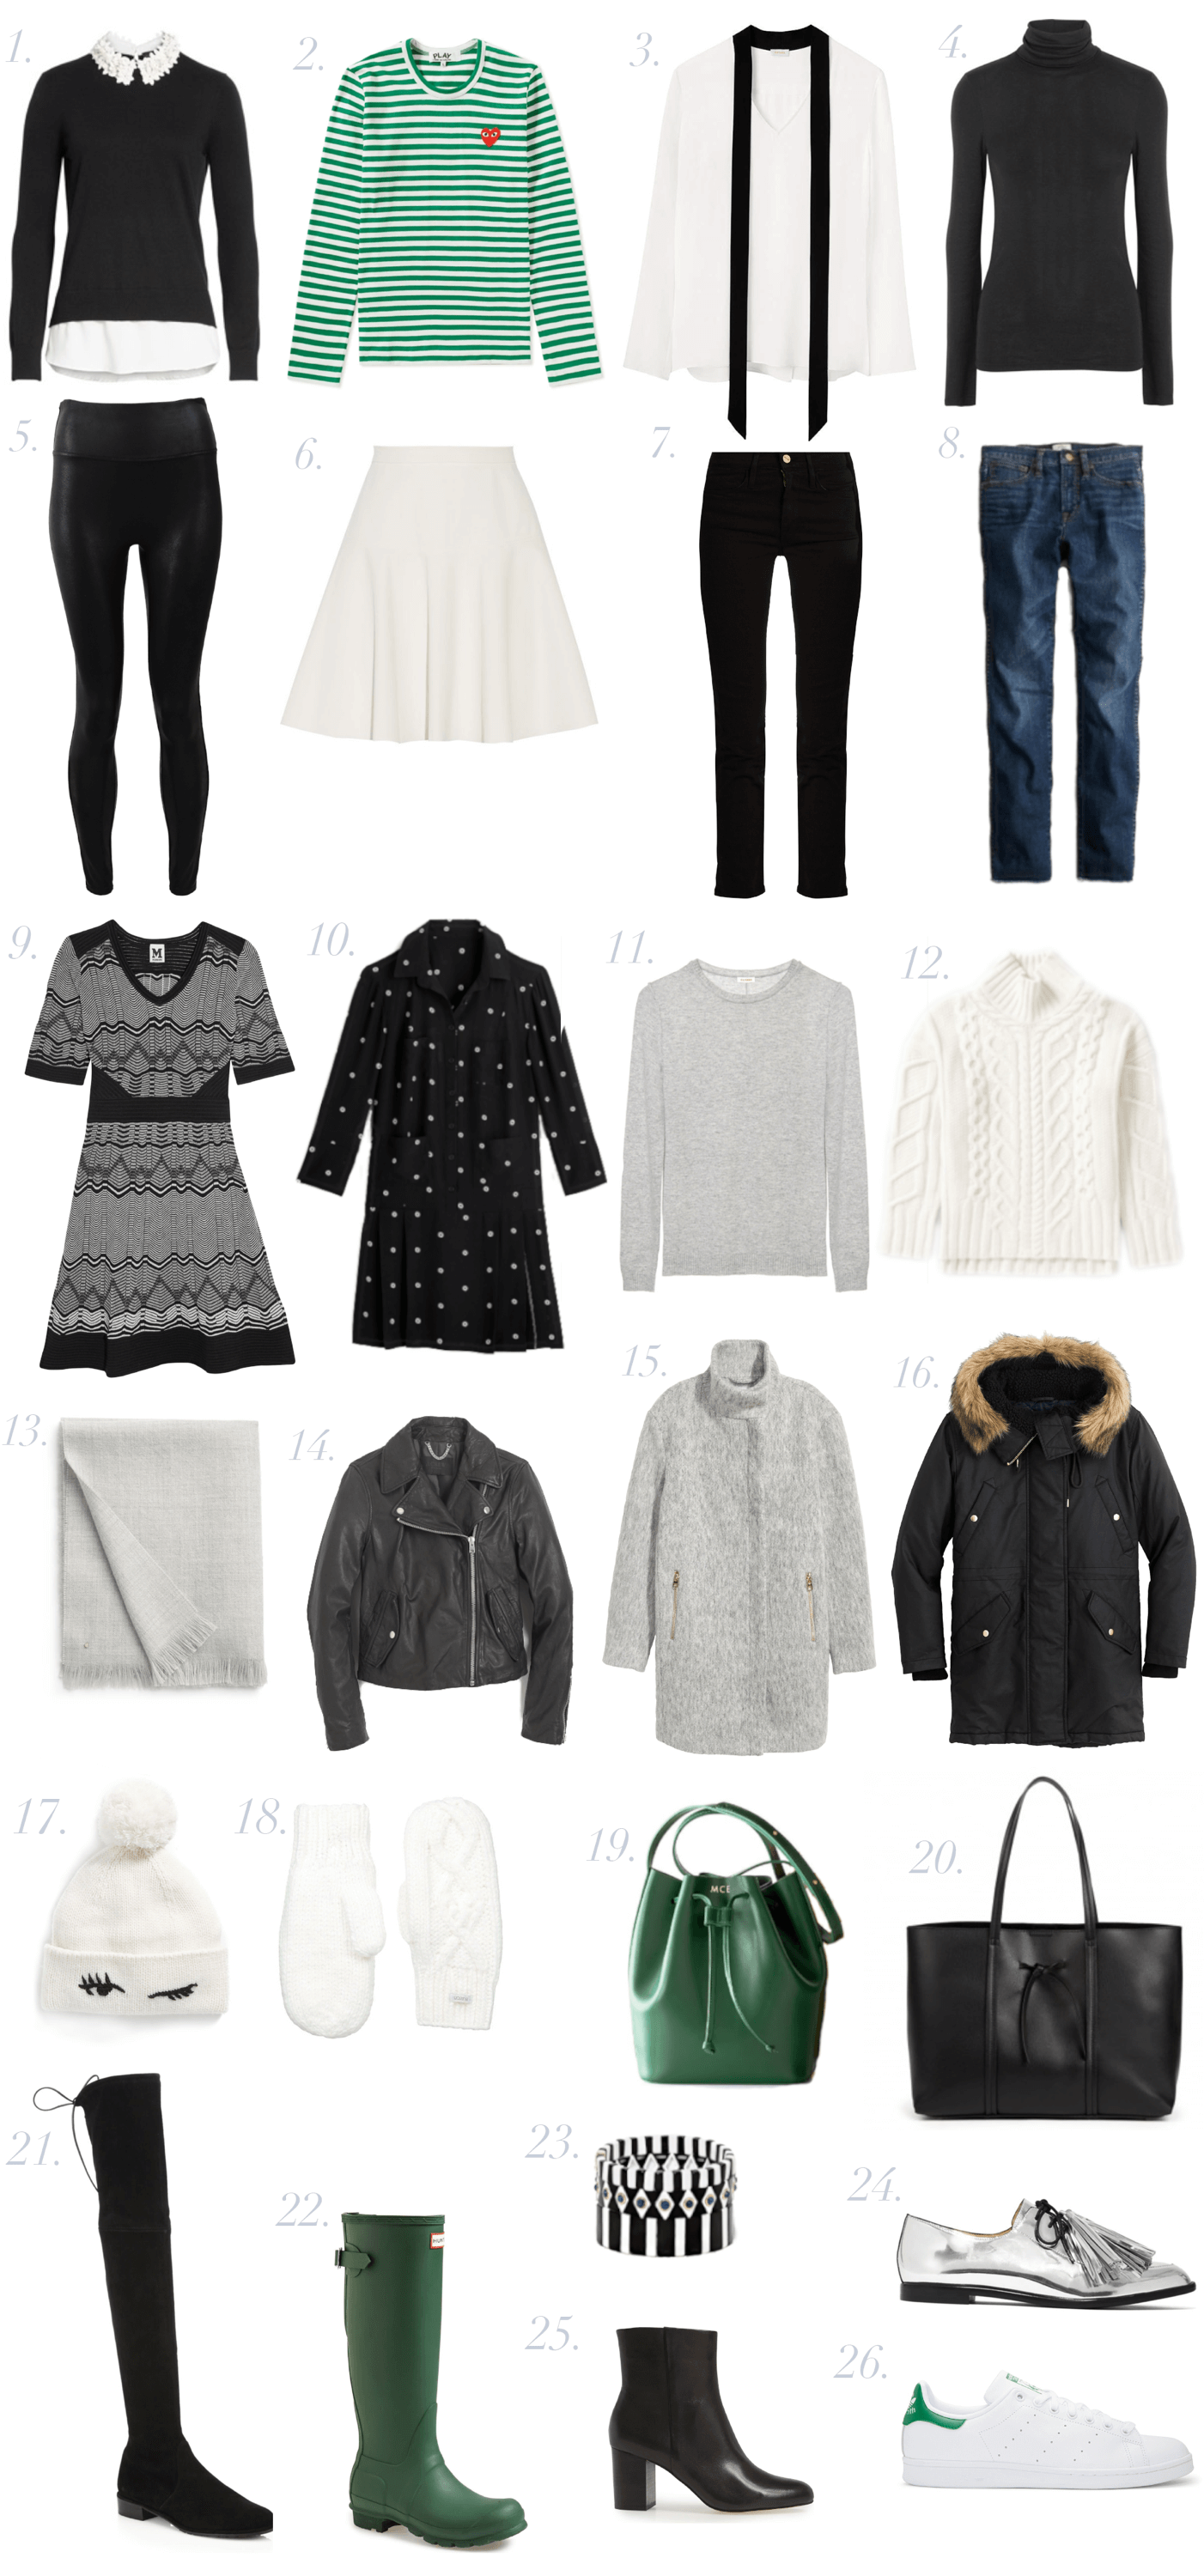 Travel Capsule Wardrobe: What to Pack for a Trip to Europe – A